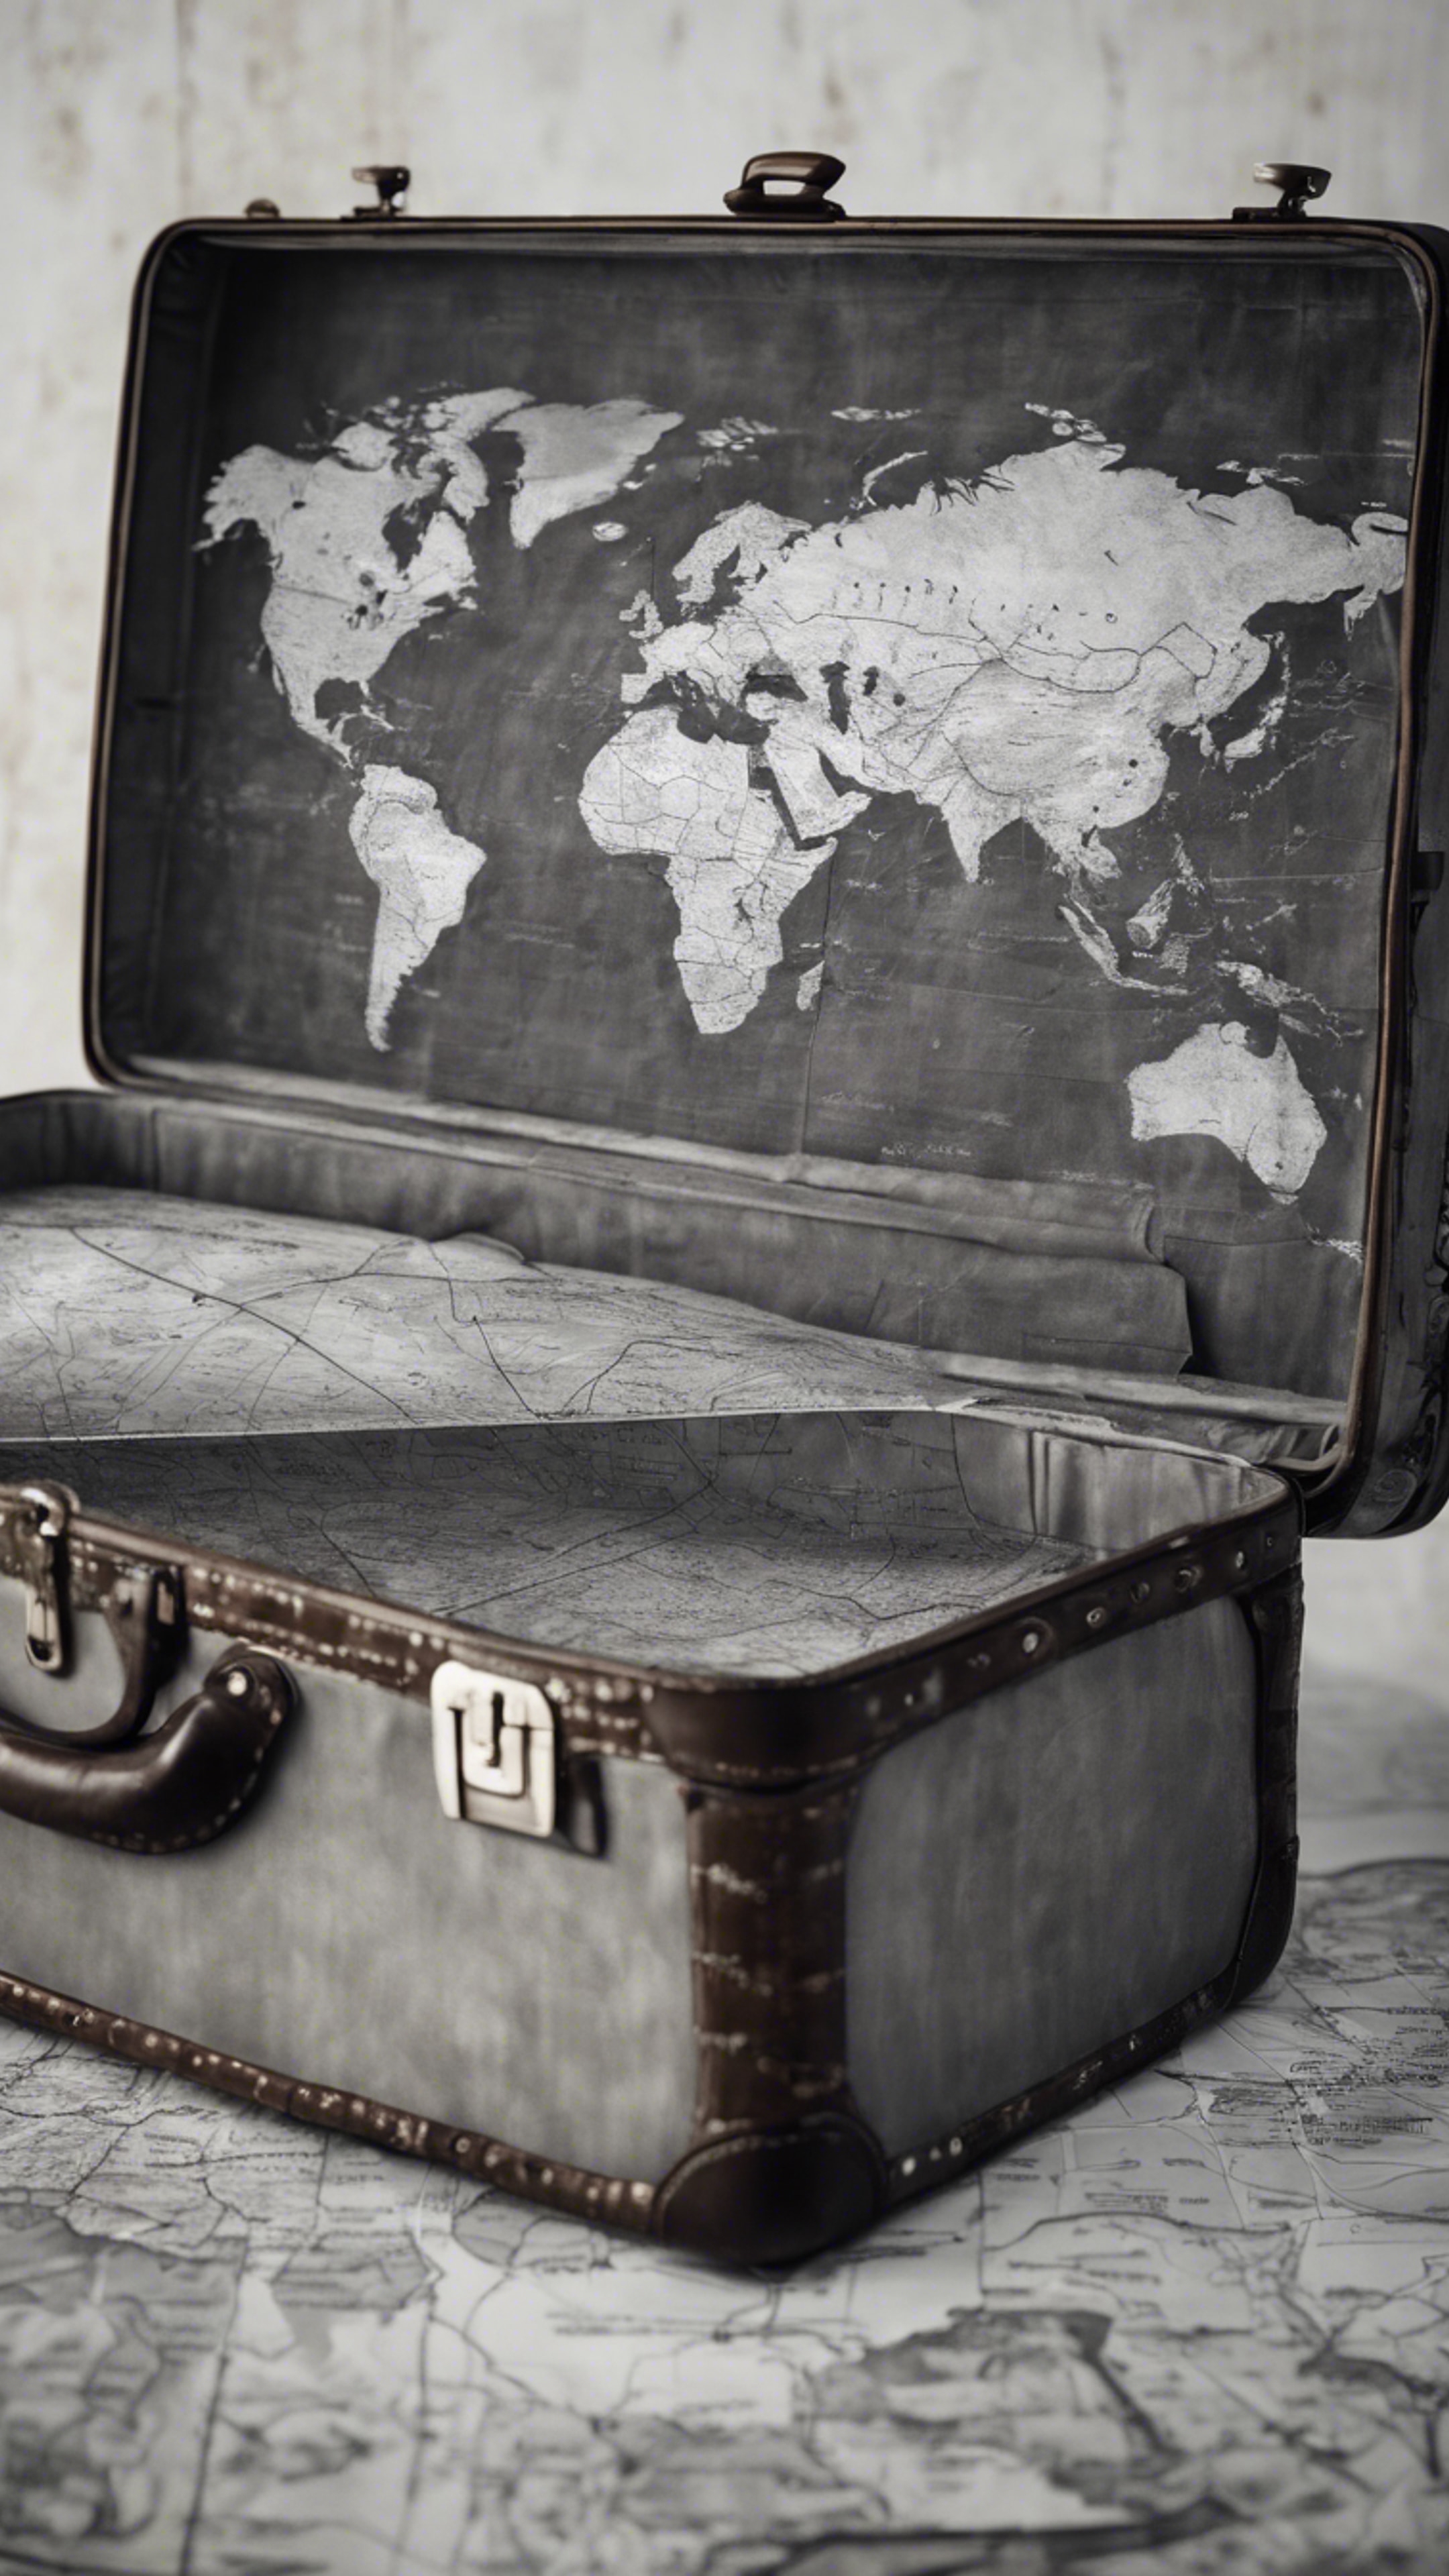 A grayscale world map painted on a vintage suitcase. Tapeta[27f356ac8e6847fe804a]